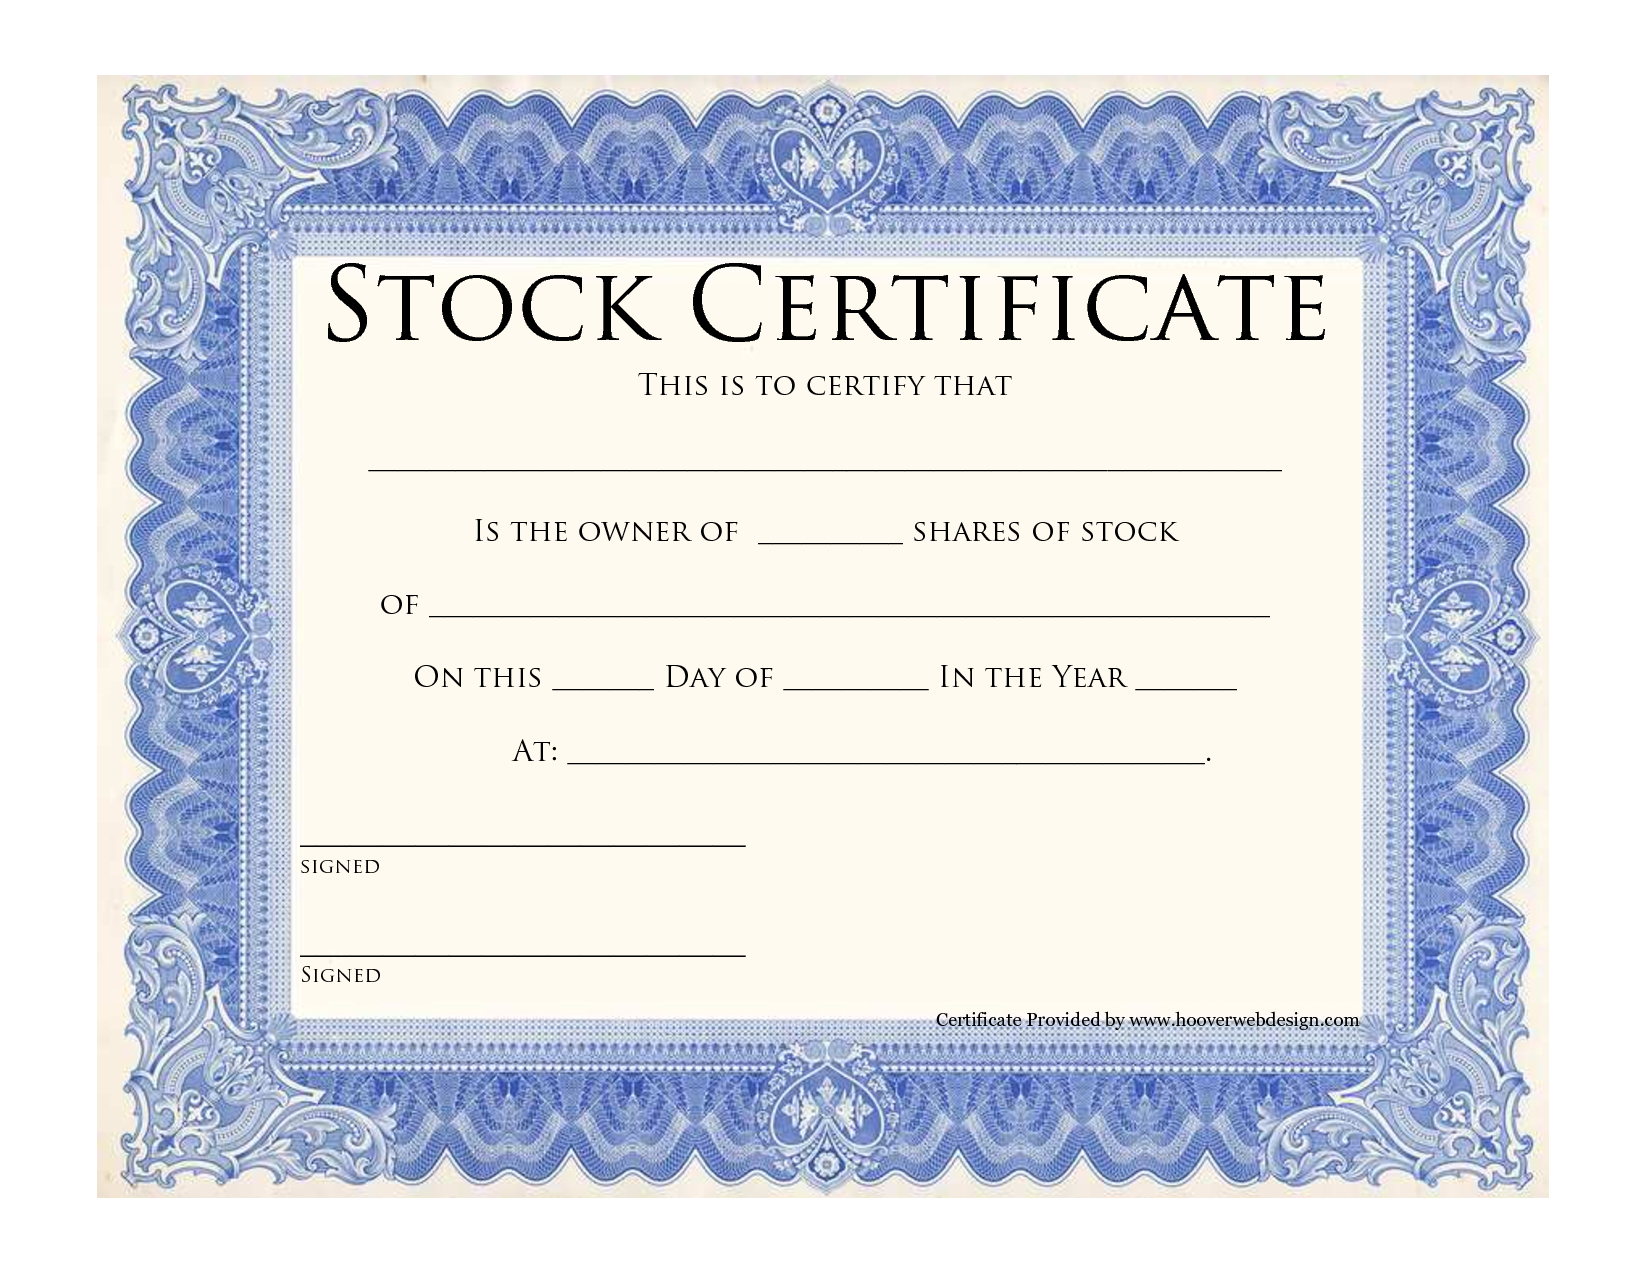 005 Free Stock Certificate Online Generator Common Share With Regard To Shareholding Certificate Template